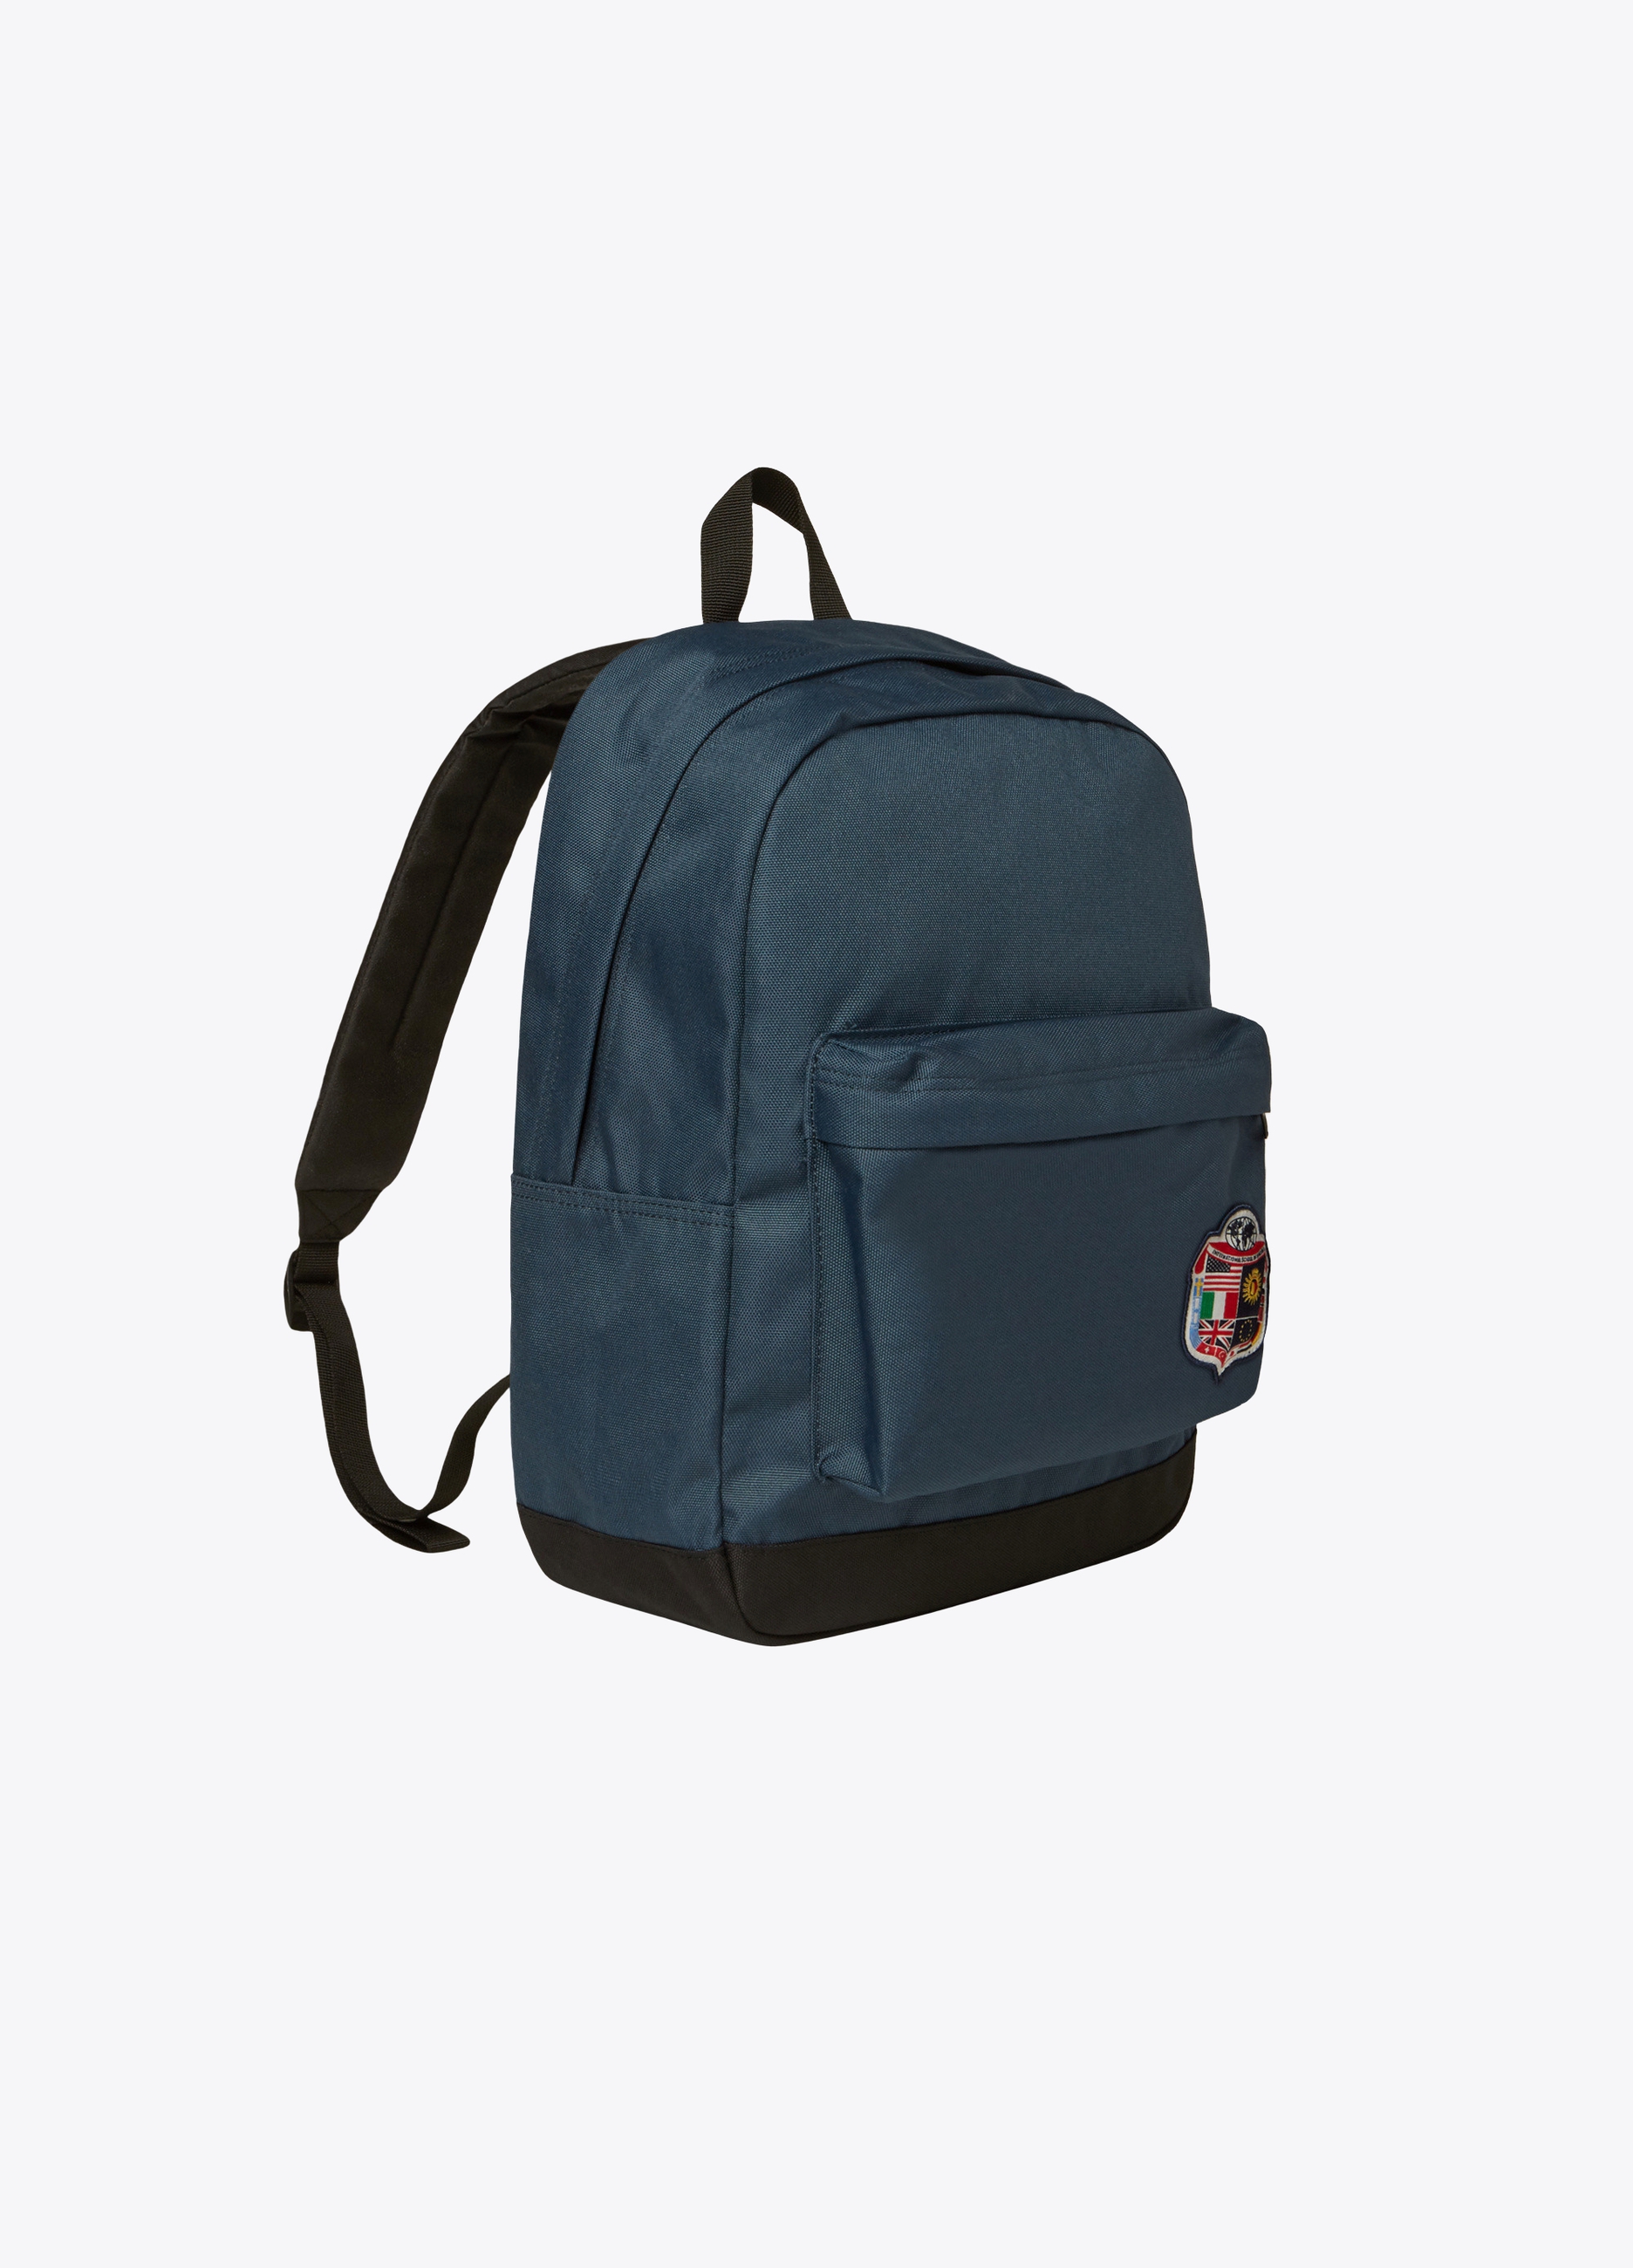 UNISEX - Solid colour backpack with patch.